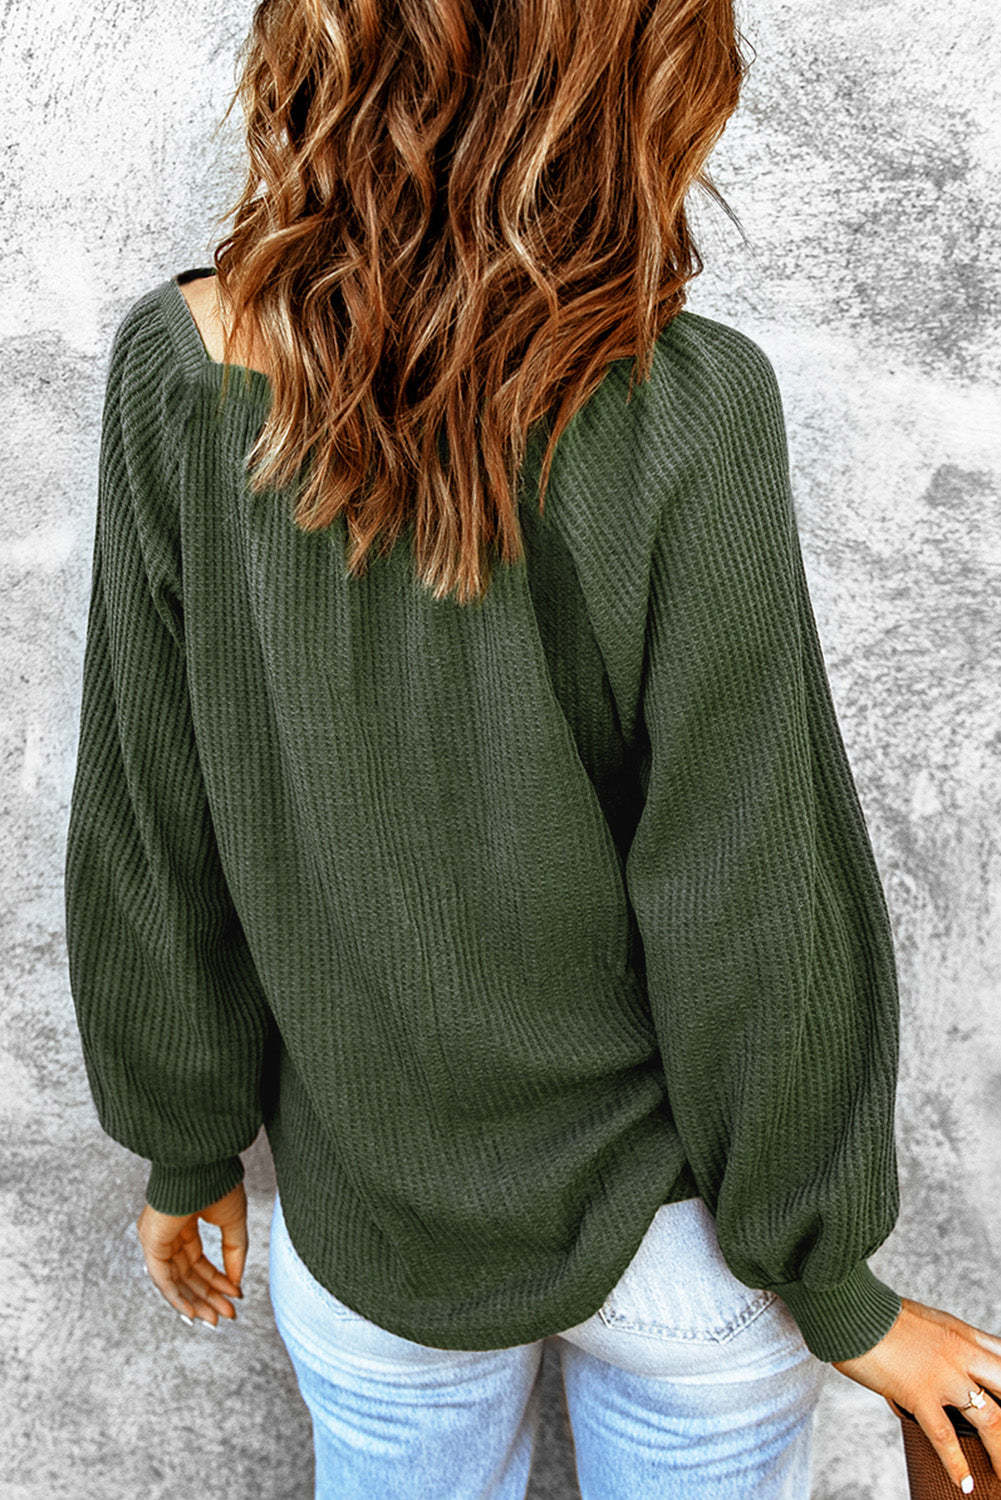 Green Waffle Texture Casual Square Neck Pullover $ 20.99 - Evaless